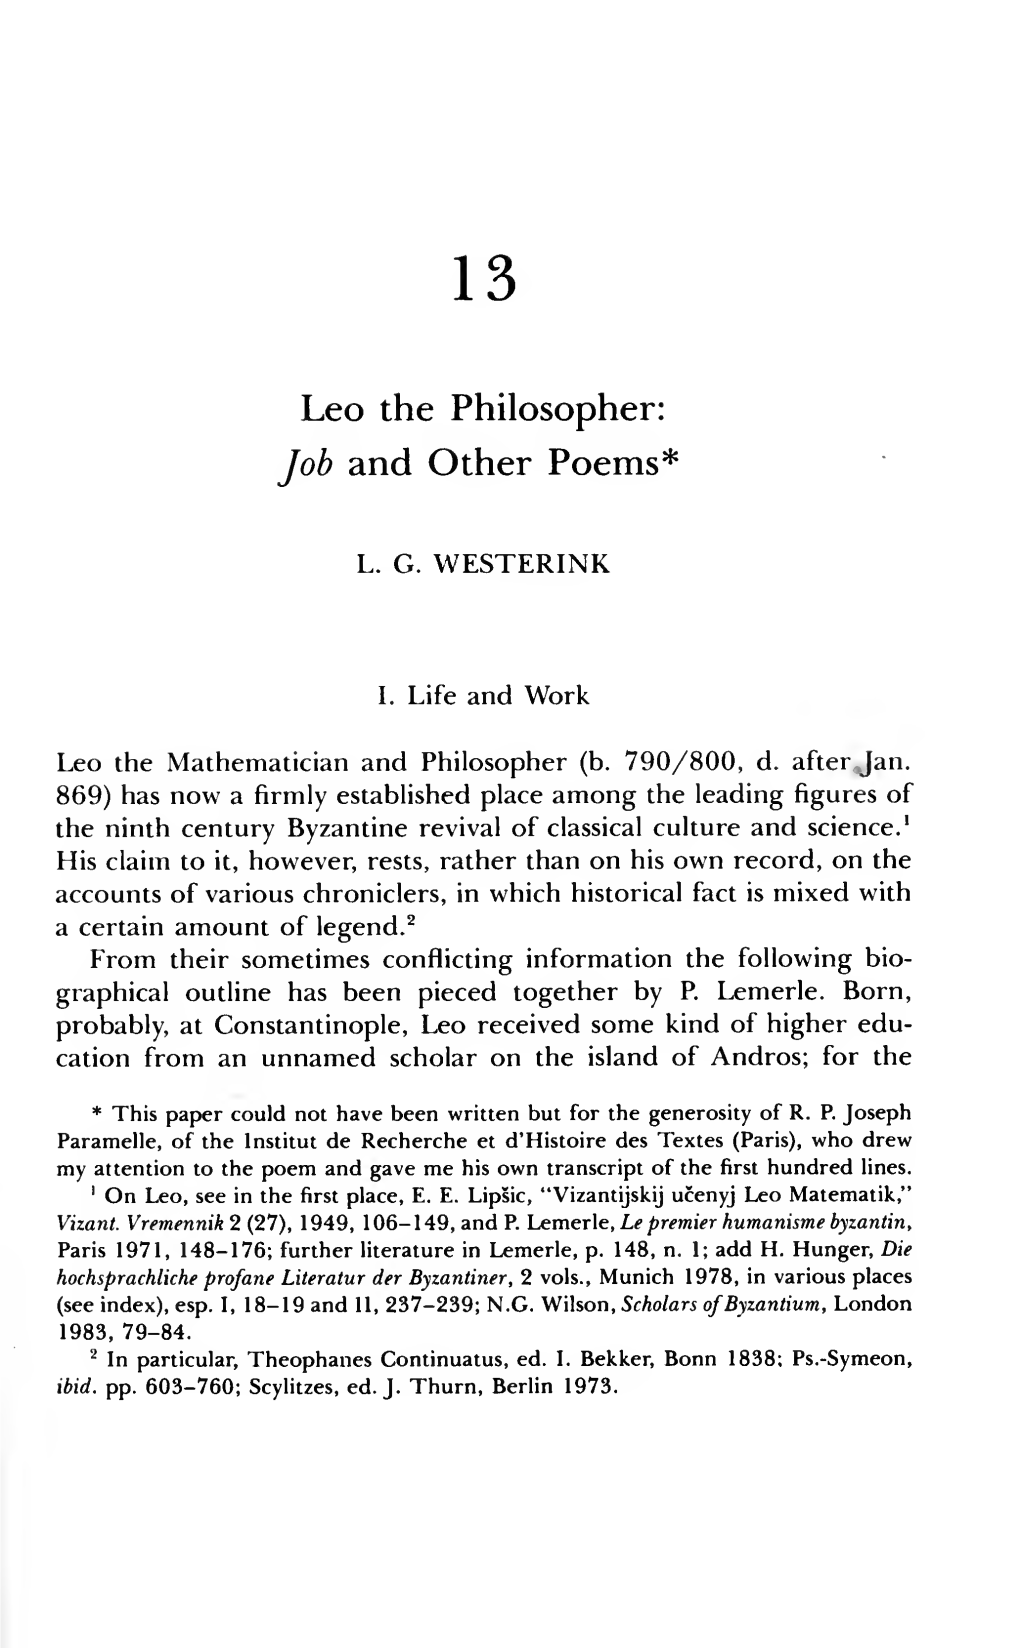 Leo the Philosopher: Job and Other Poems*